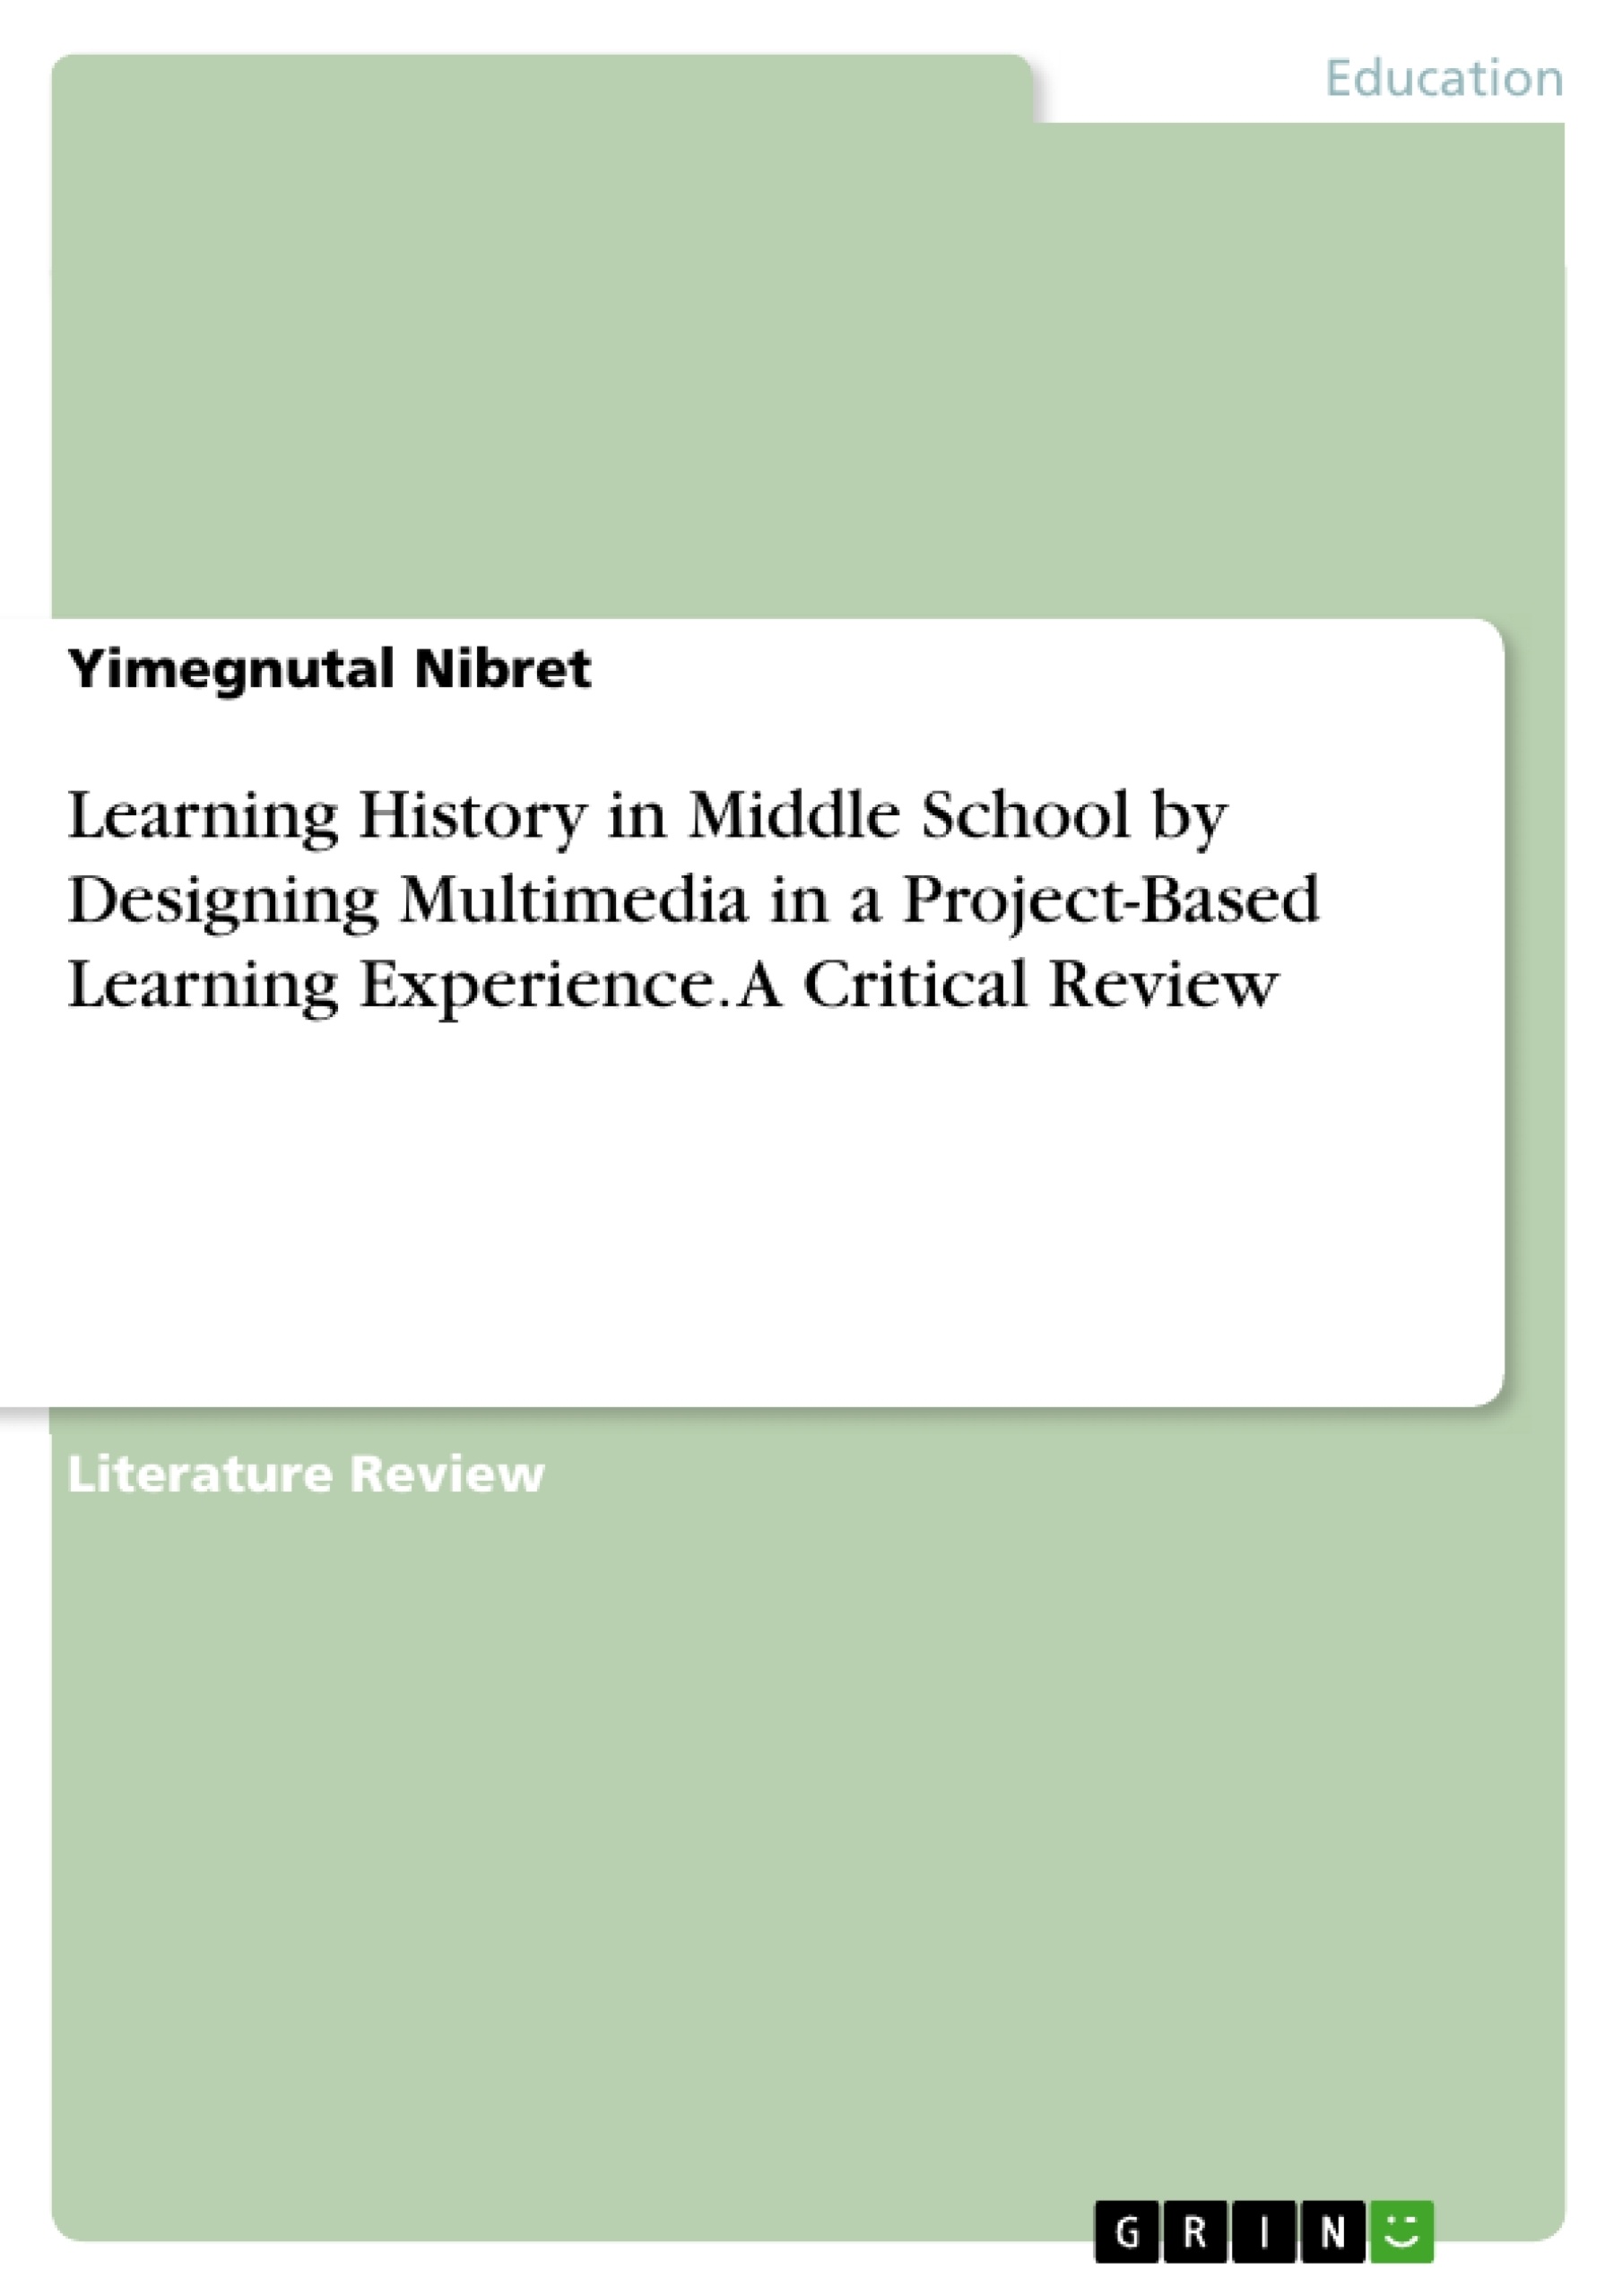 Title: Learning History in Middle School by Designing Multimedia in a Project-Based Learning Experience. A Critical Review